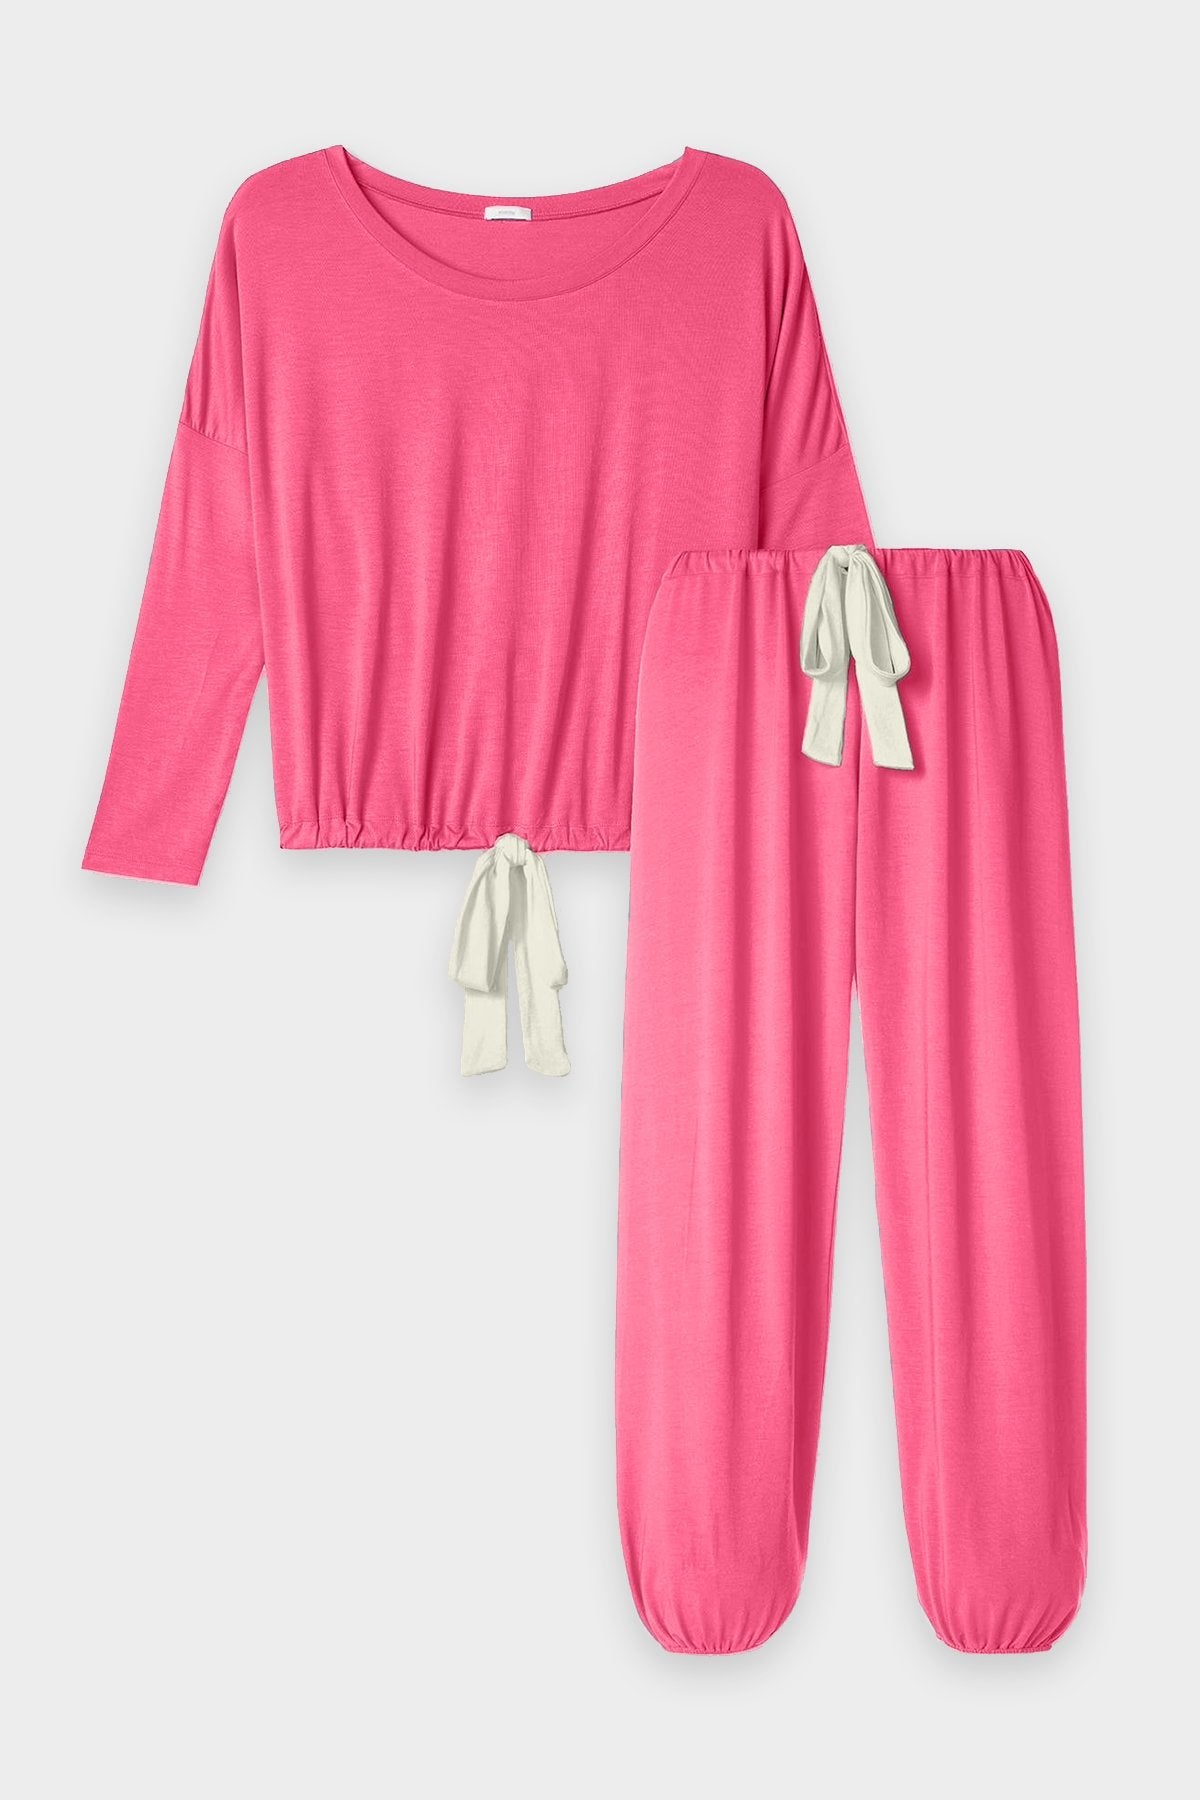 Gisele Modal Slouchy Set in Bright Pink - shop-olivia.com